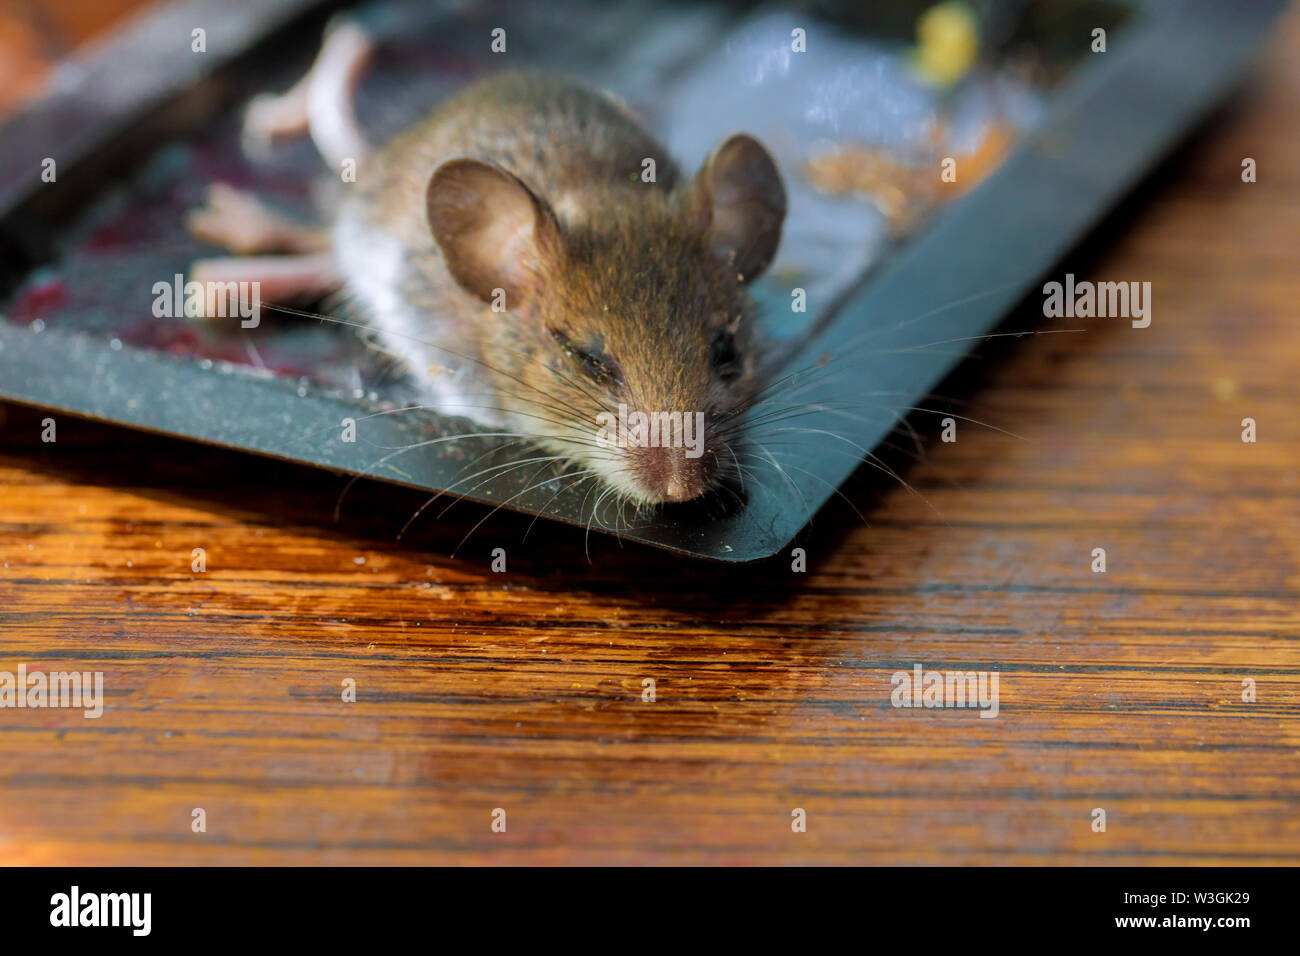 Dead rat glued at clue tray on wood table mouse killed Stock Photo